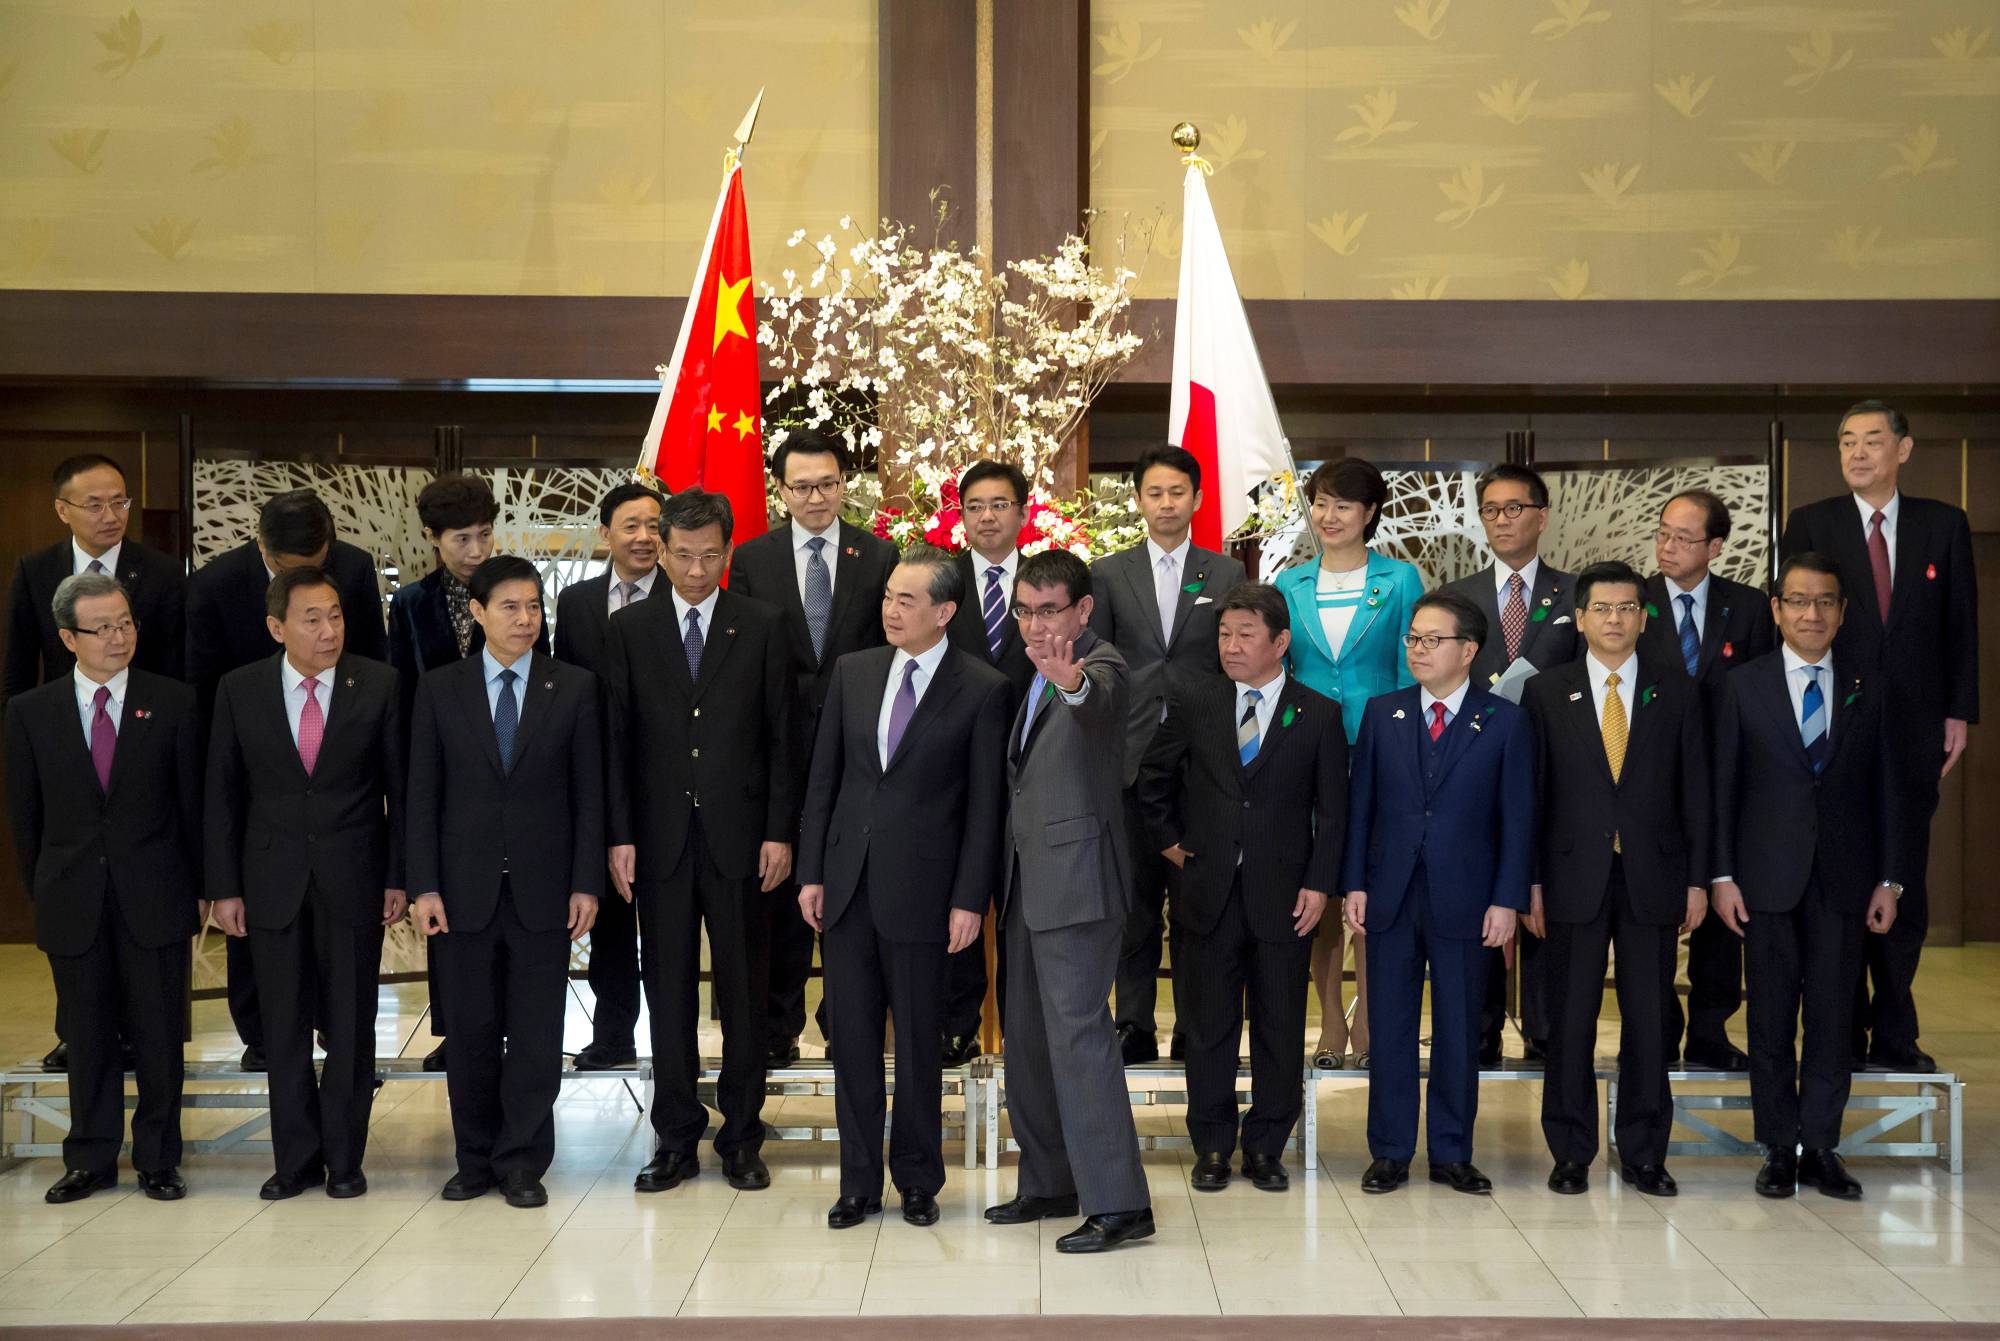 Wang Yi, China's foreign minister, and Taro Kono, then-Japan's foreign minister, are seen with their countries' economy ministers and other officials ahead of a high-level China-Japan economic dialogue in Tokyo in April 2018. | POOL / VIA REUTERS